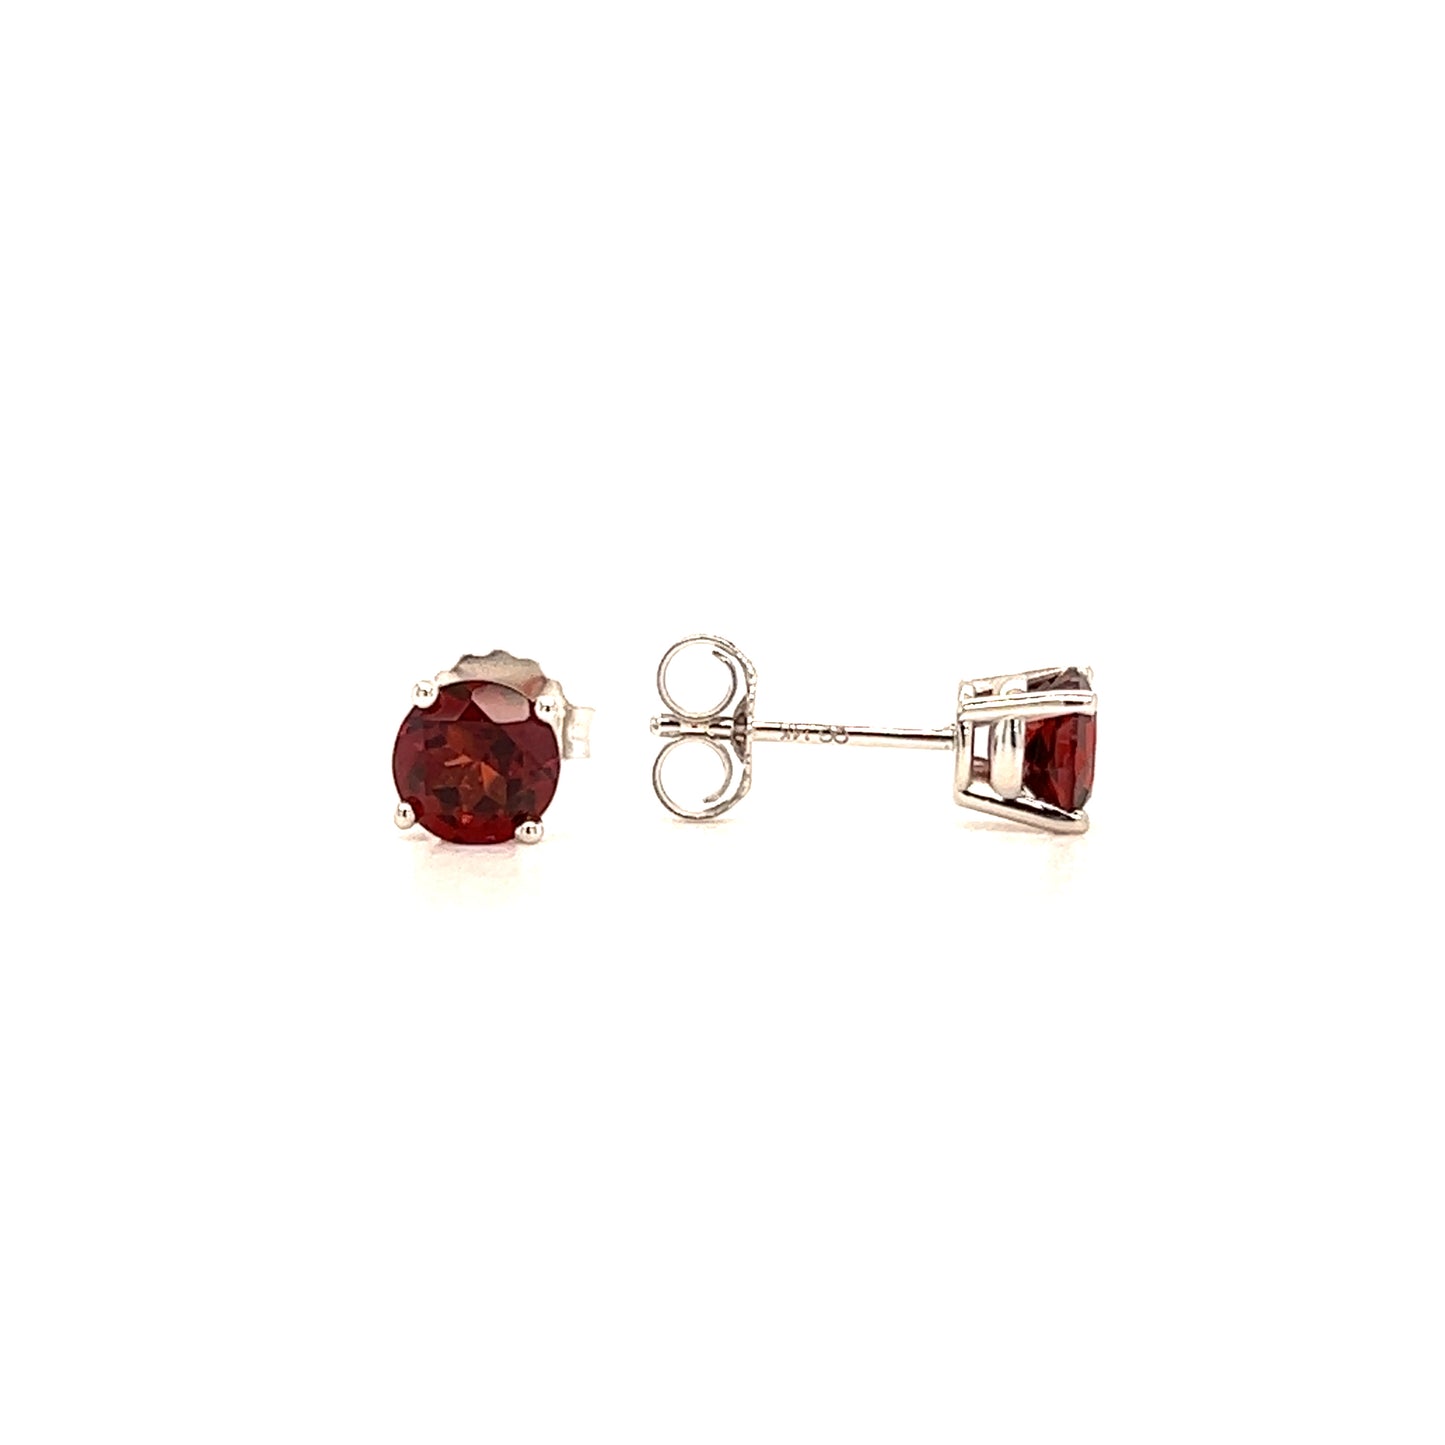 Round Garnet 5mm Stud Earrings in 14K White Gold Front and Side View